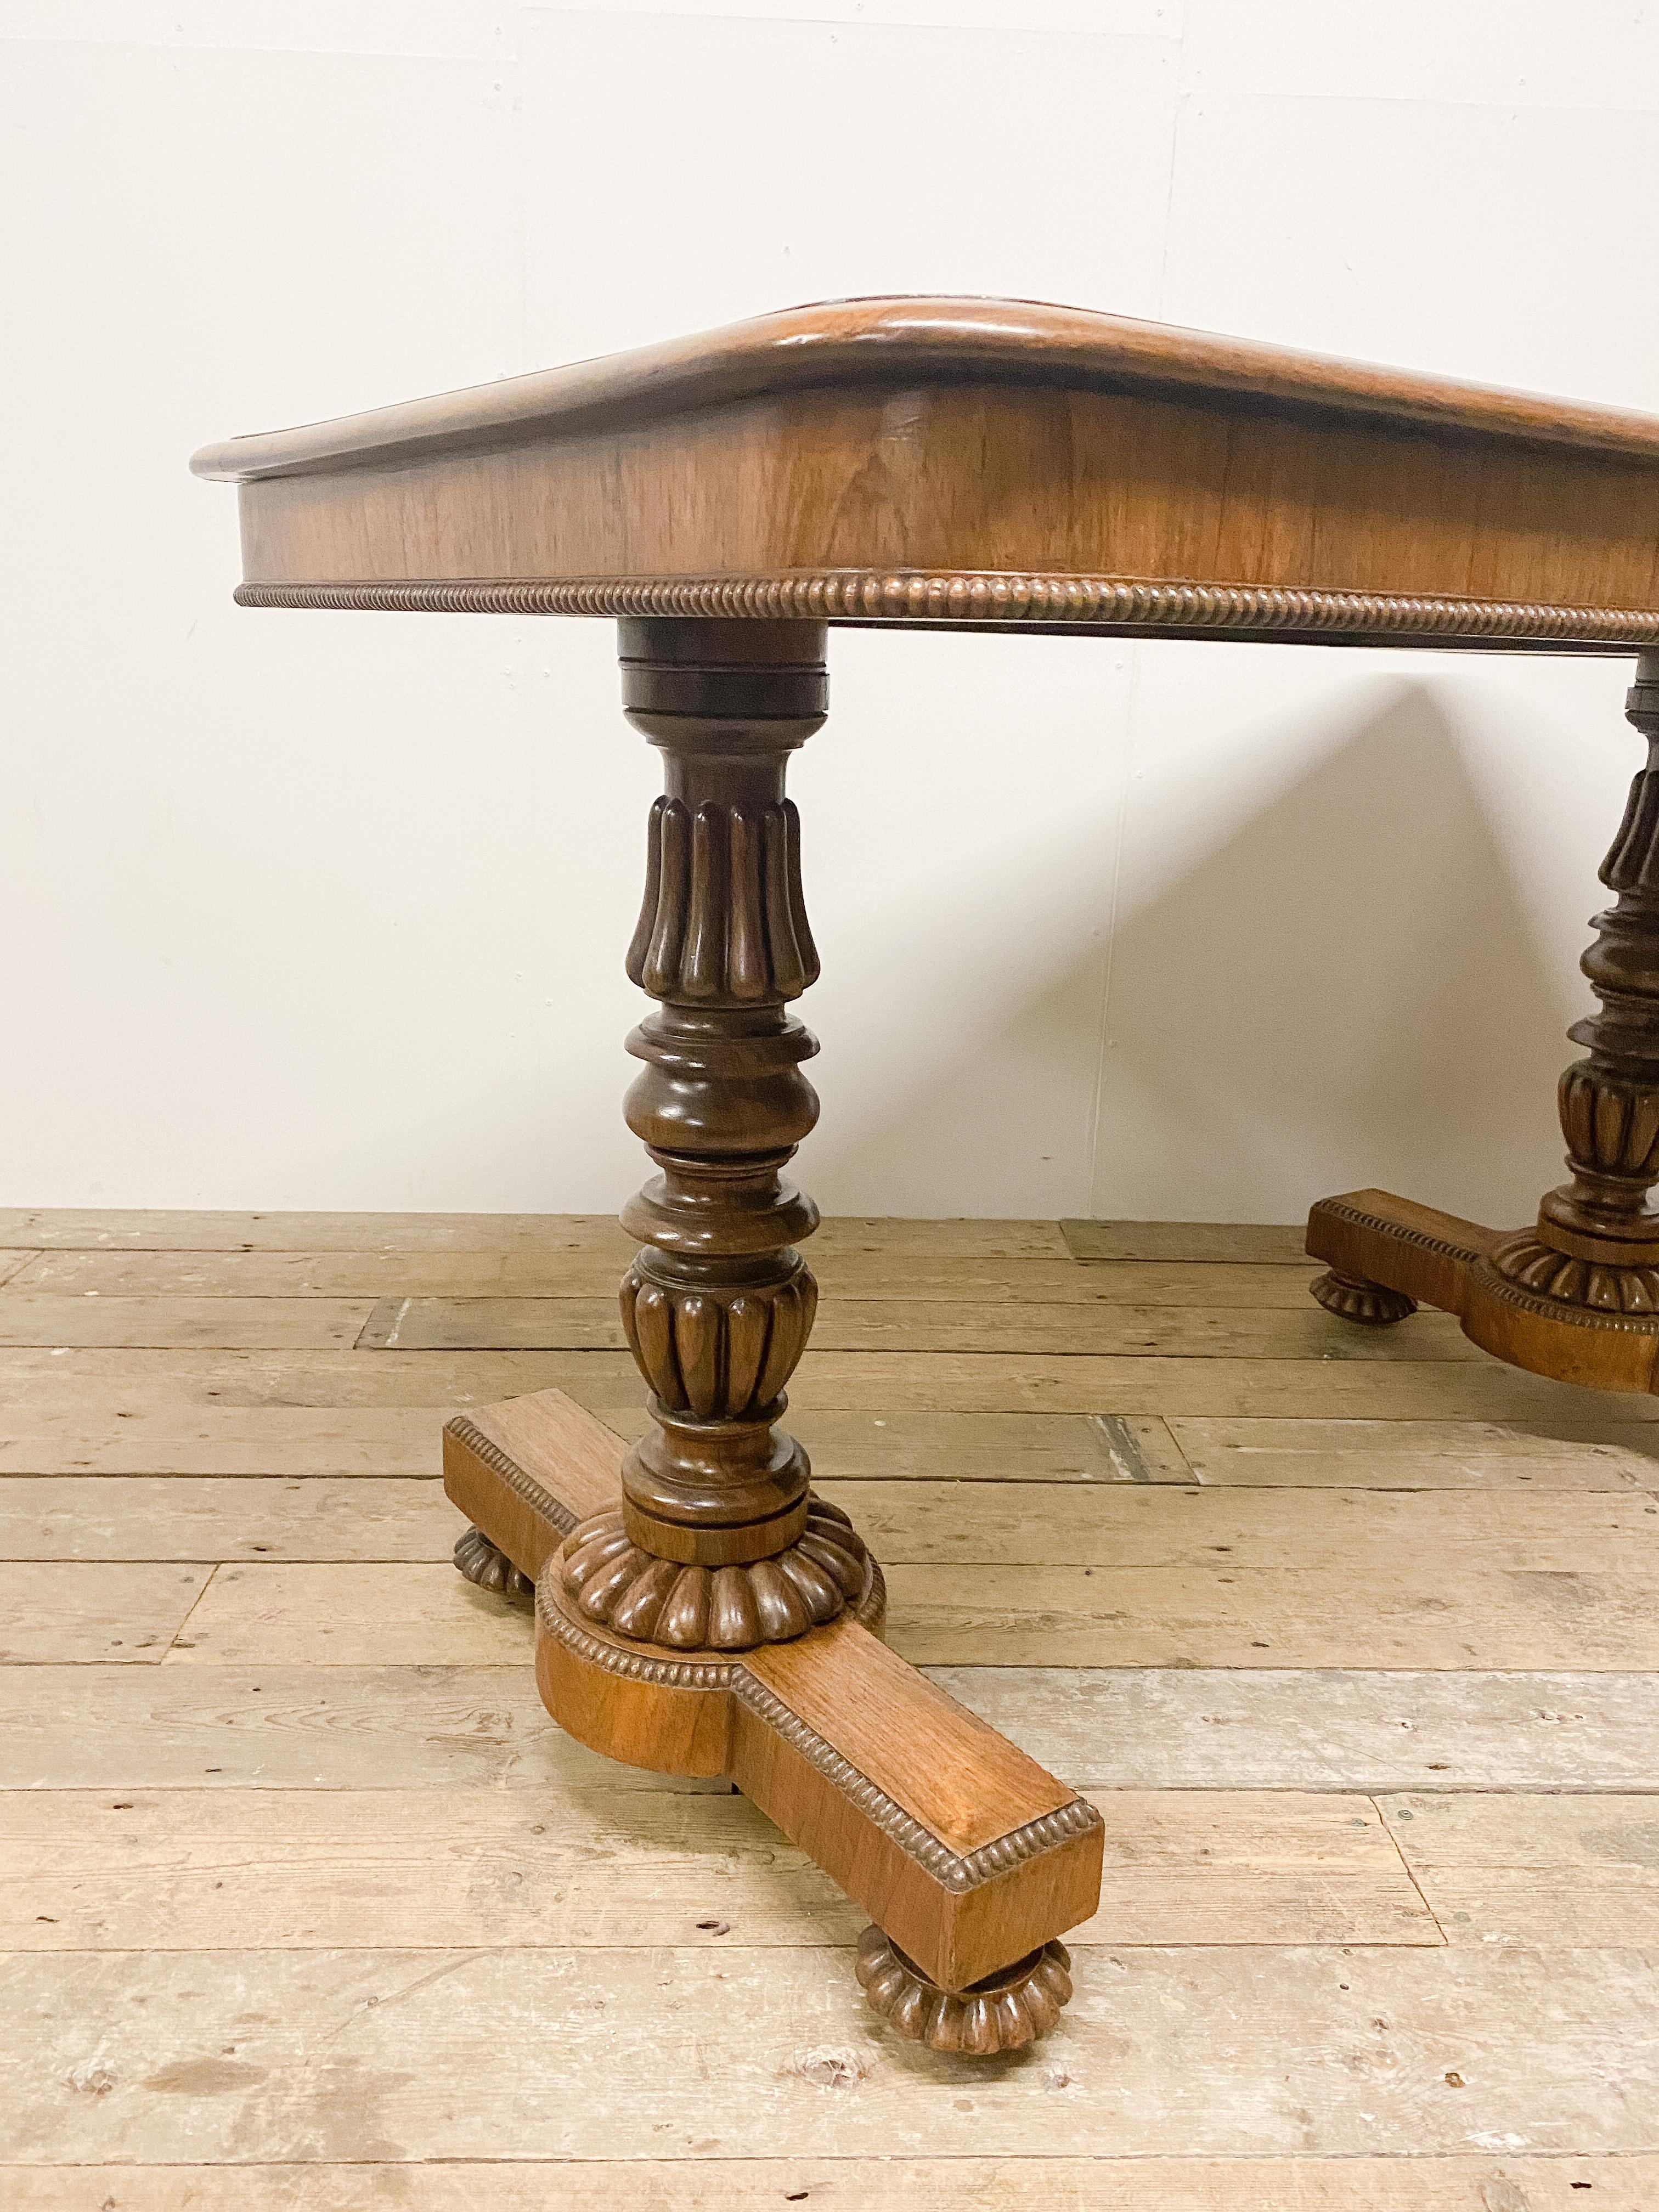 A Goncalo Alves library table firmly attributed to Gillows and dating to about 1810. Gillows of Lancaster and London, also known as Gillow & Co., was an English furniture making firm based in Lancaster, Lancashire, and in London. It was founded